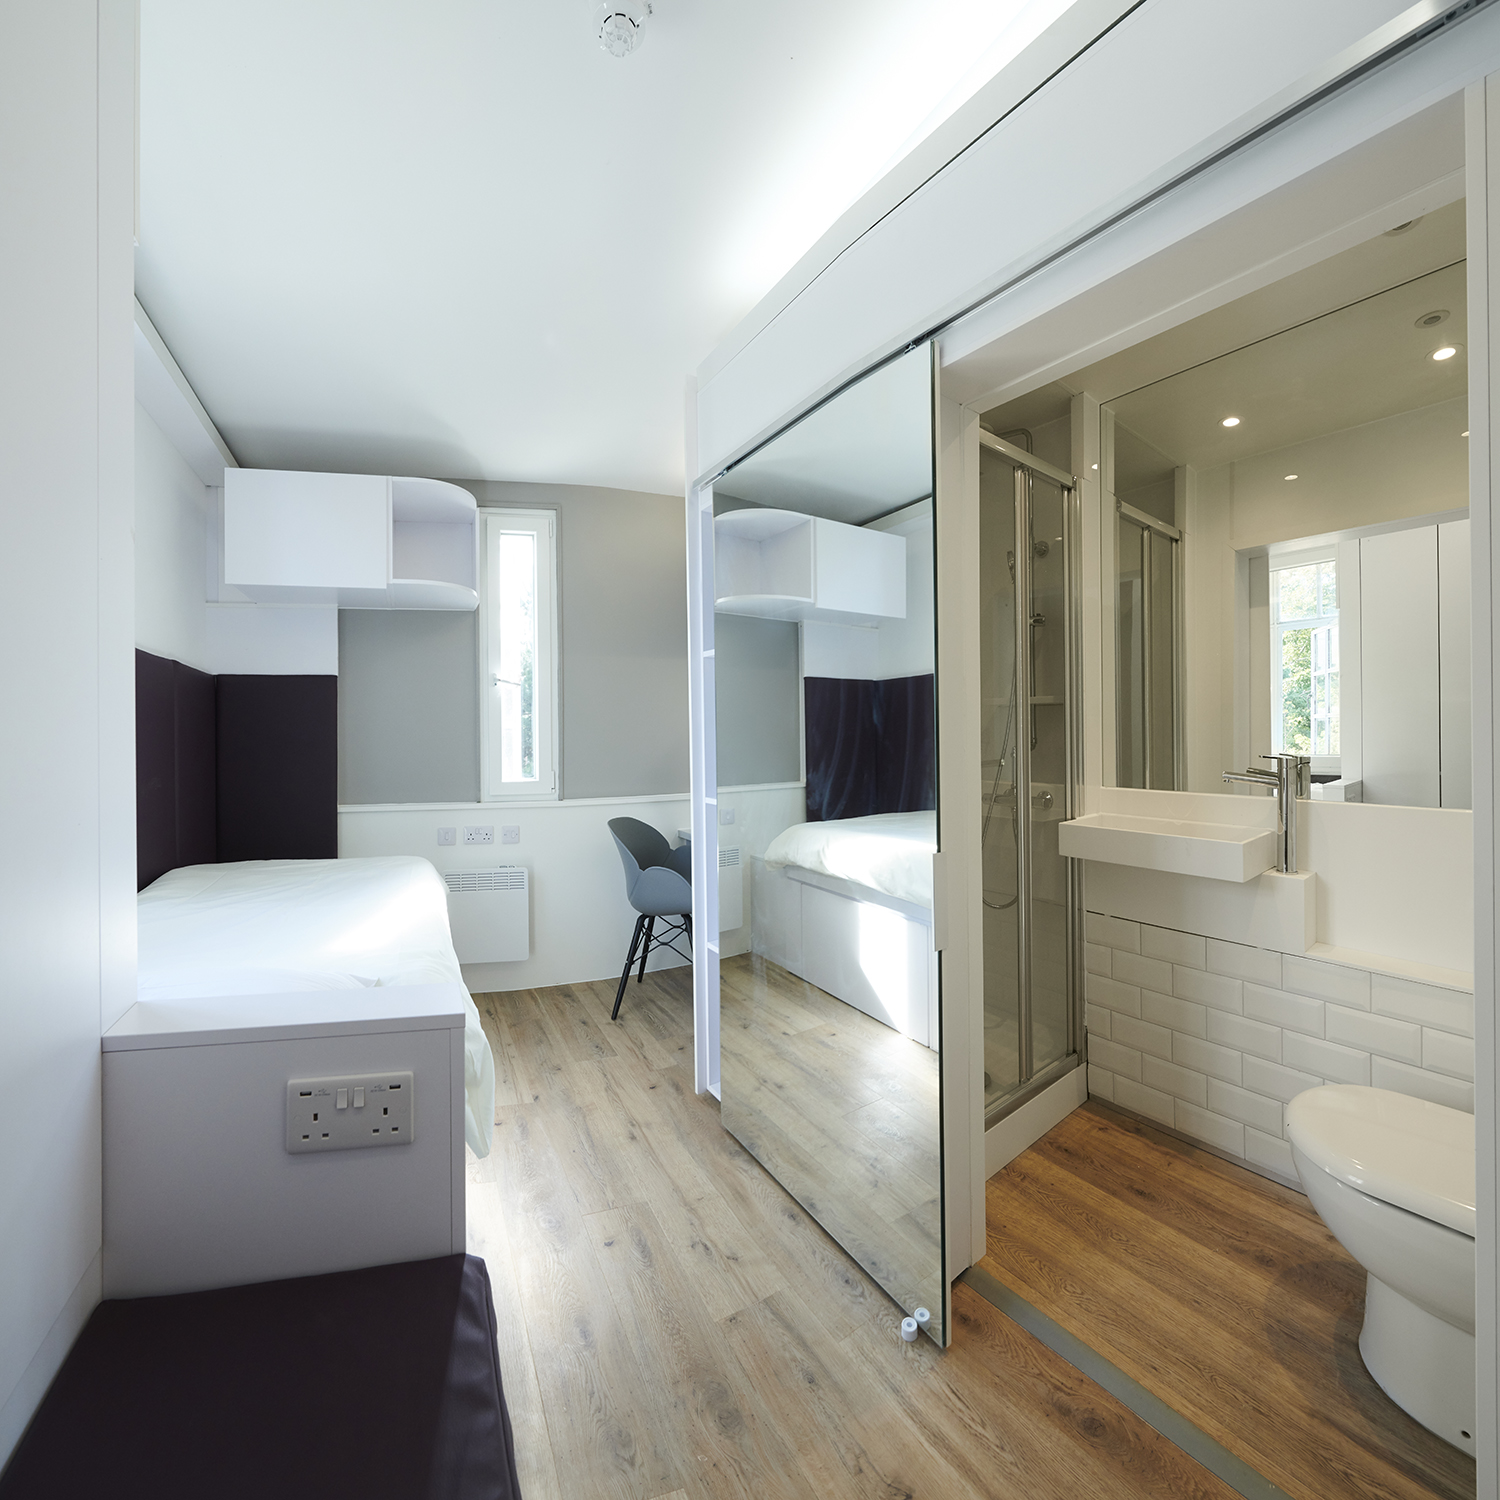 A full-length sliding mirror-door is pulled back to reveal the en-suite bathroom in a room in the eastern wing of Main Halls.